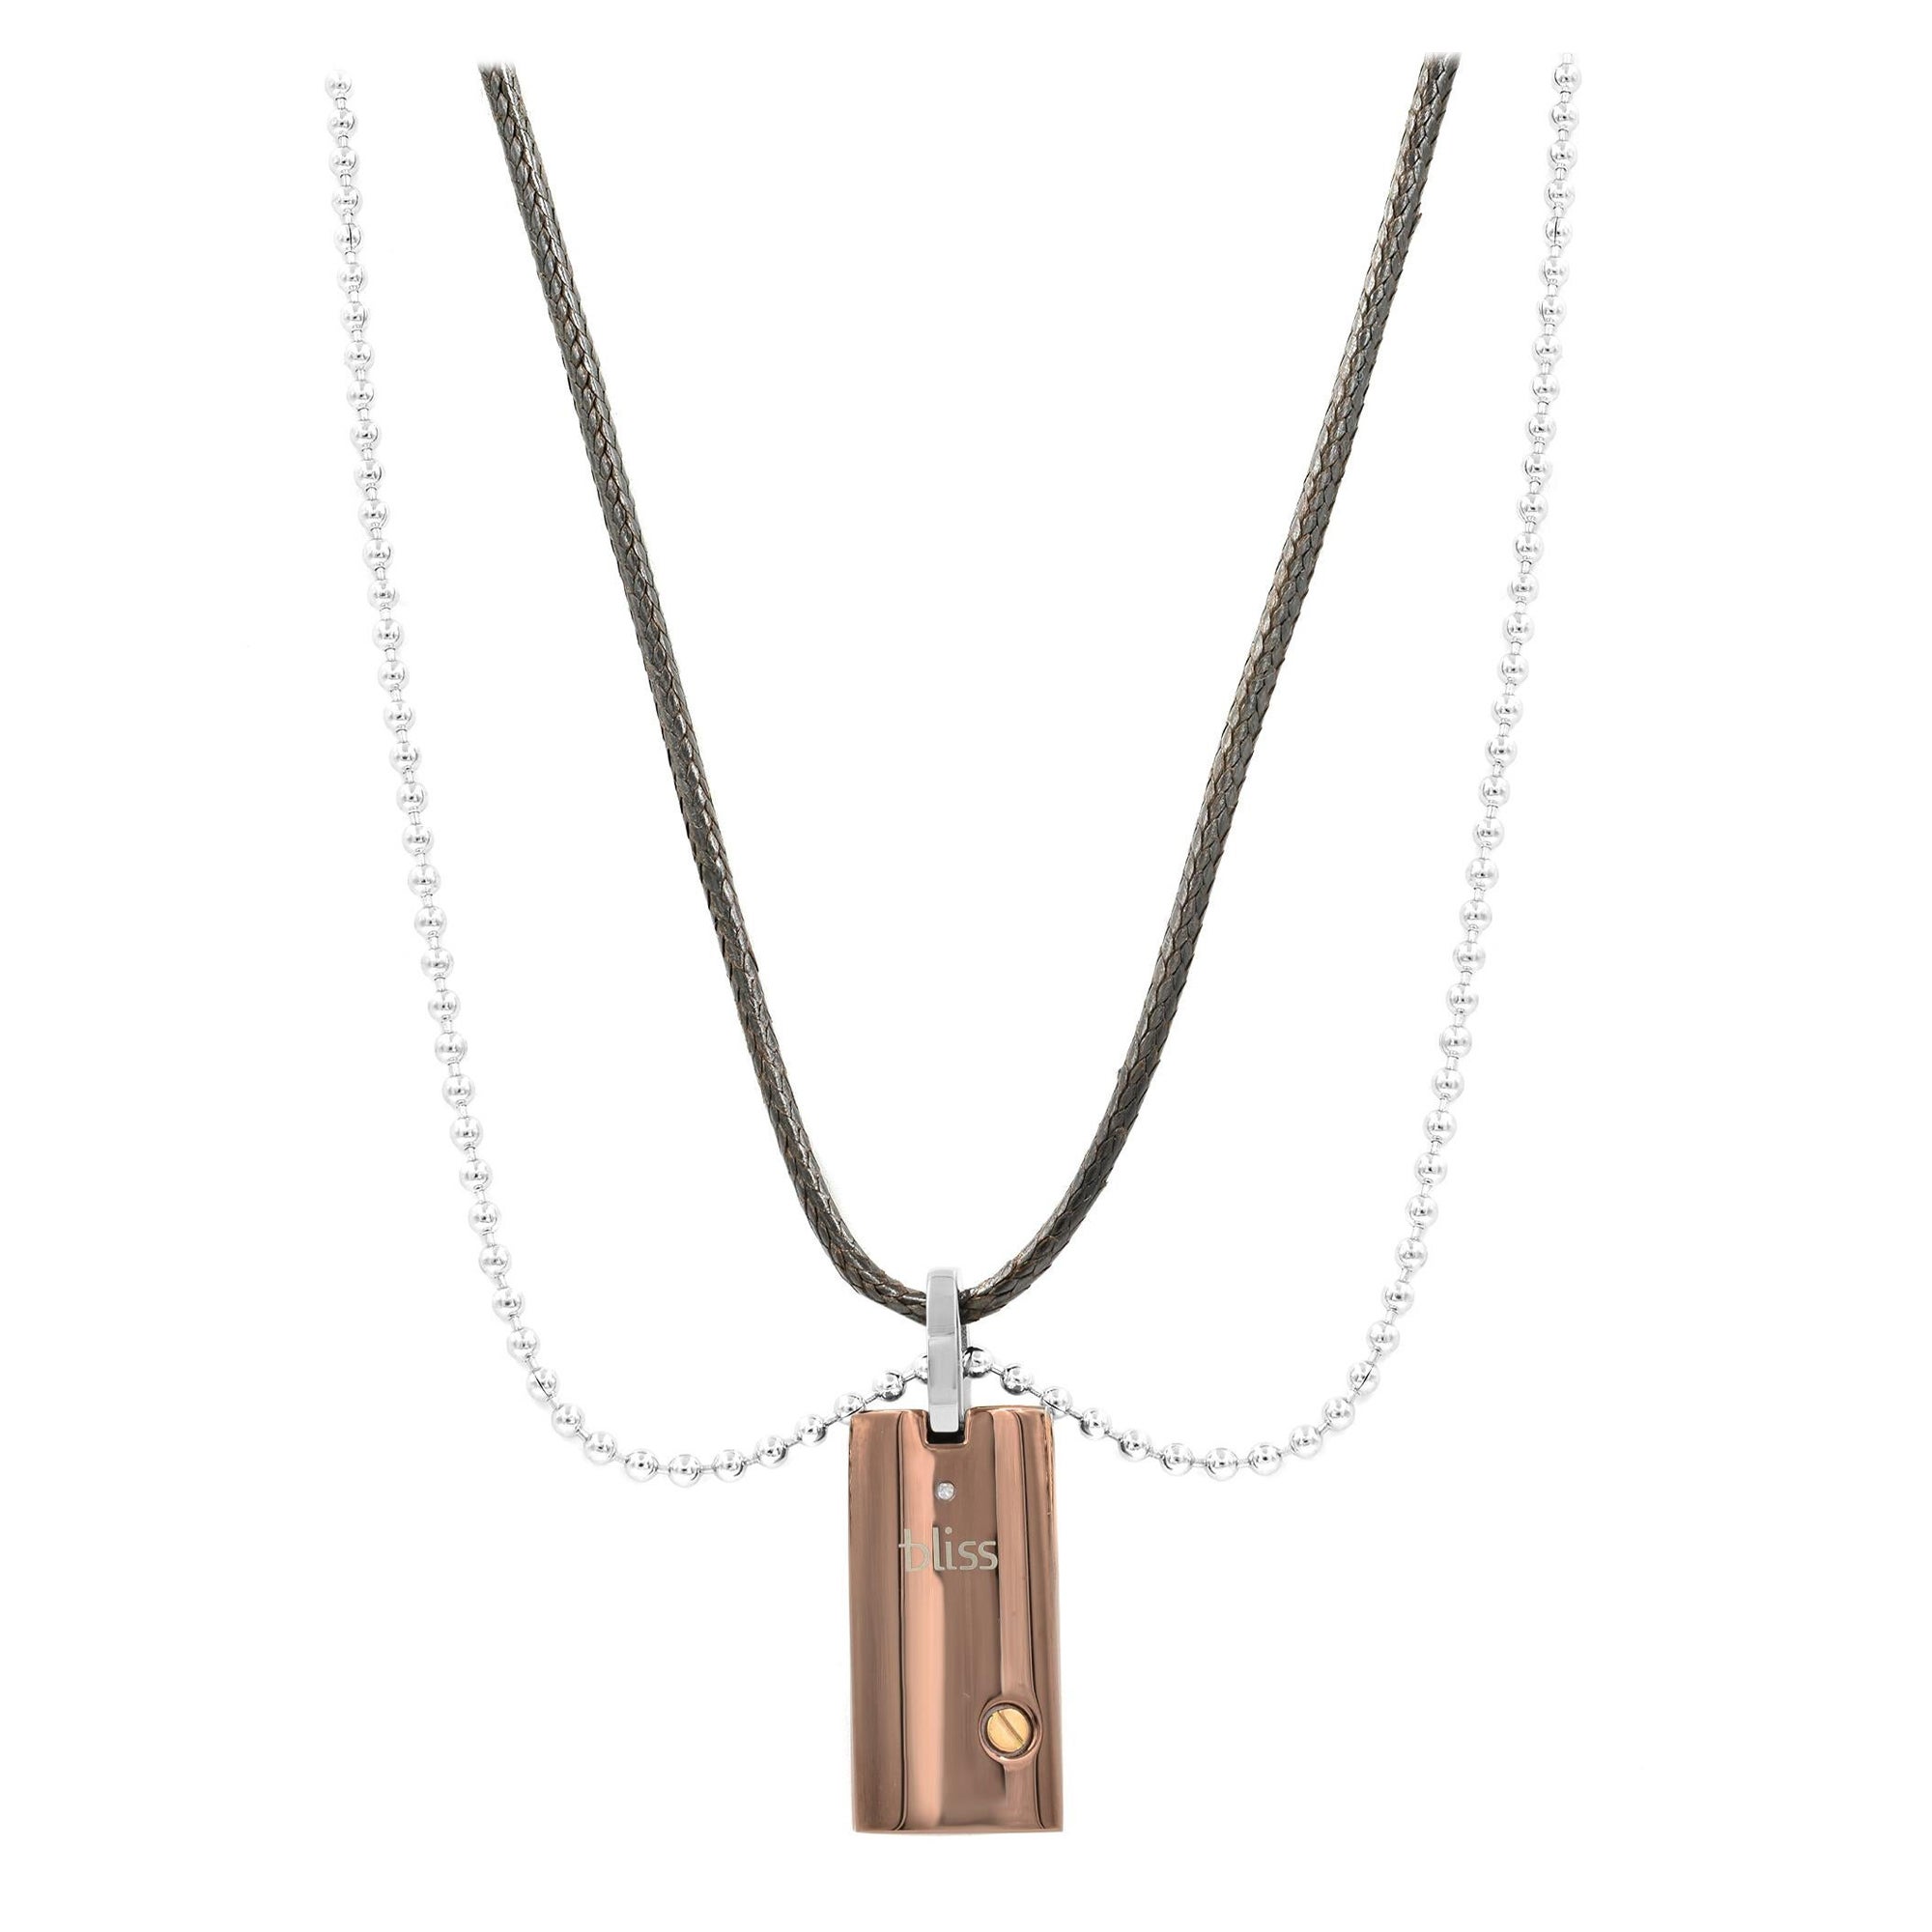 Bliss by Damiani Uomo Diamond Pendant Necklace Brown Stainless Steel 18K Gold For Sale